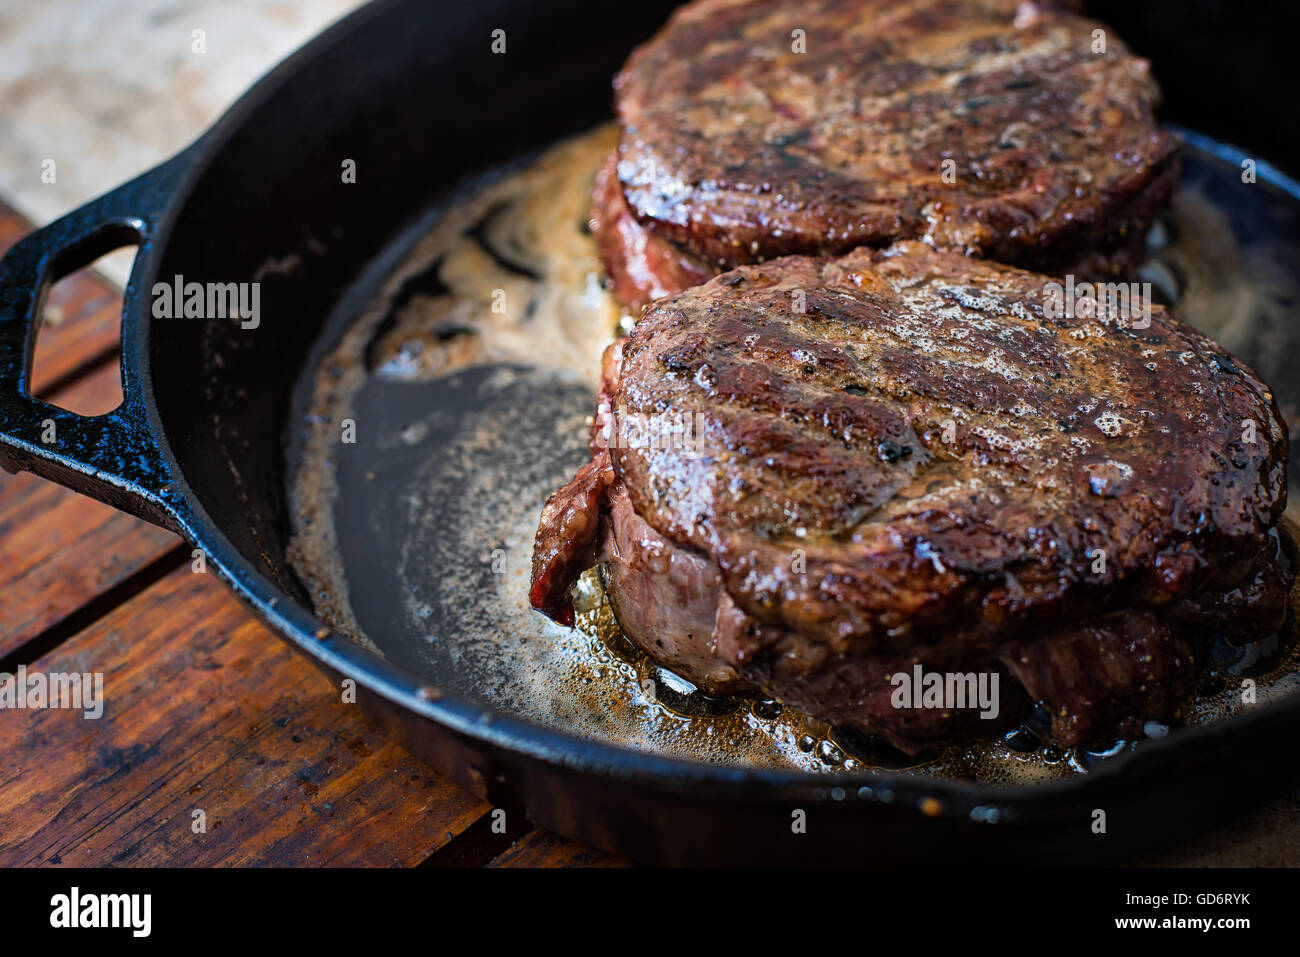 A pair of ribeye cap steaks cooked in a cast iron skillet along with a butter bath. Stock Photo